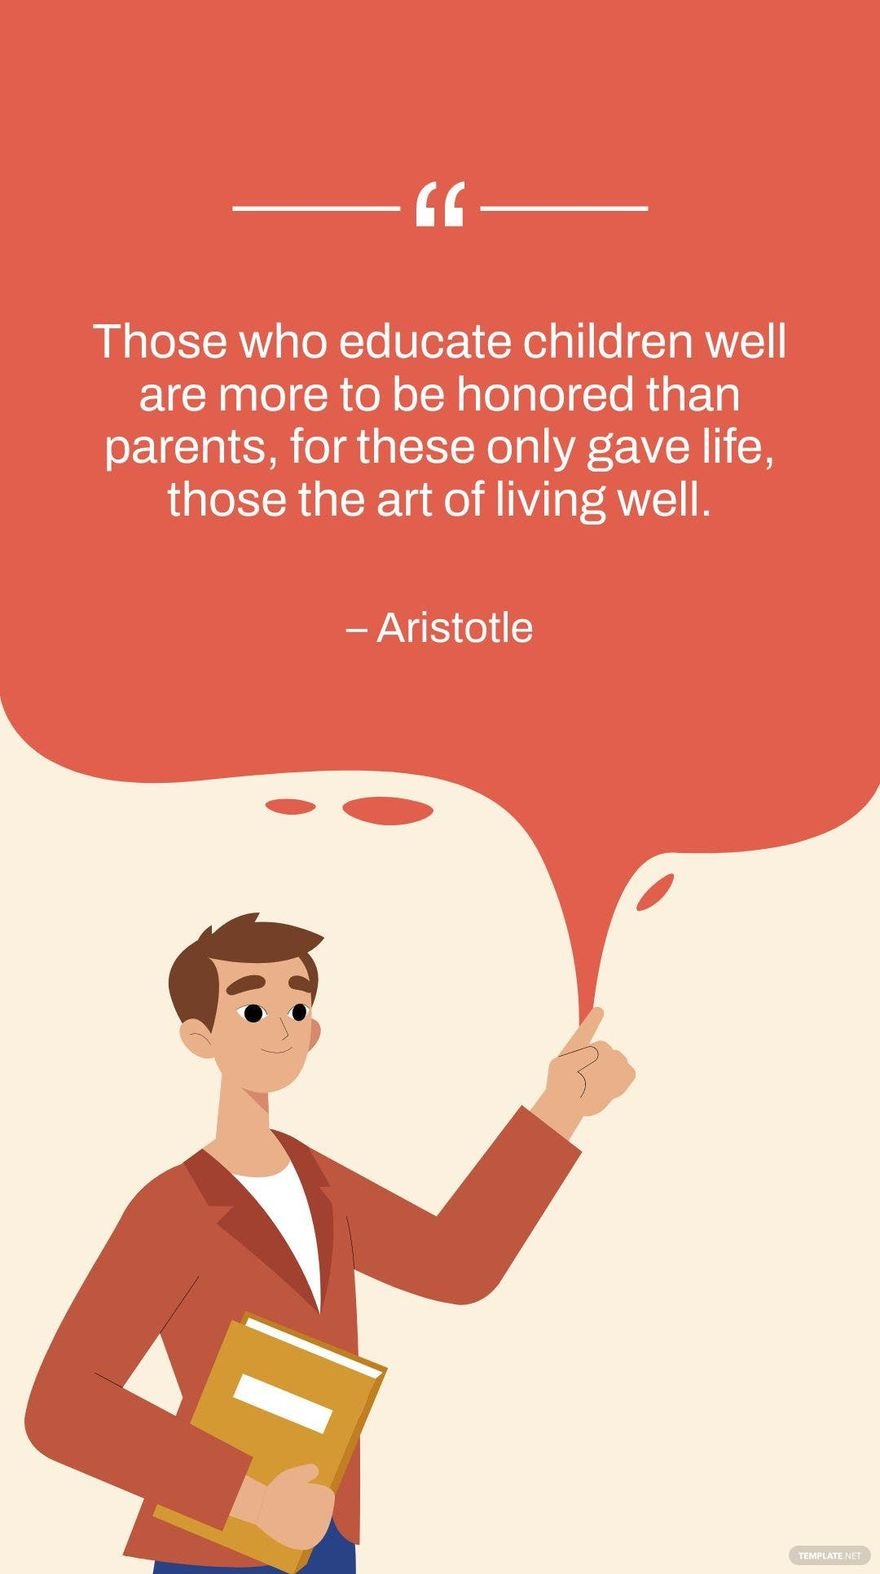 Aristotle - Those who educate children well are more to be honored than parents, for these only gave life, those the art of living well.